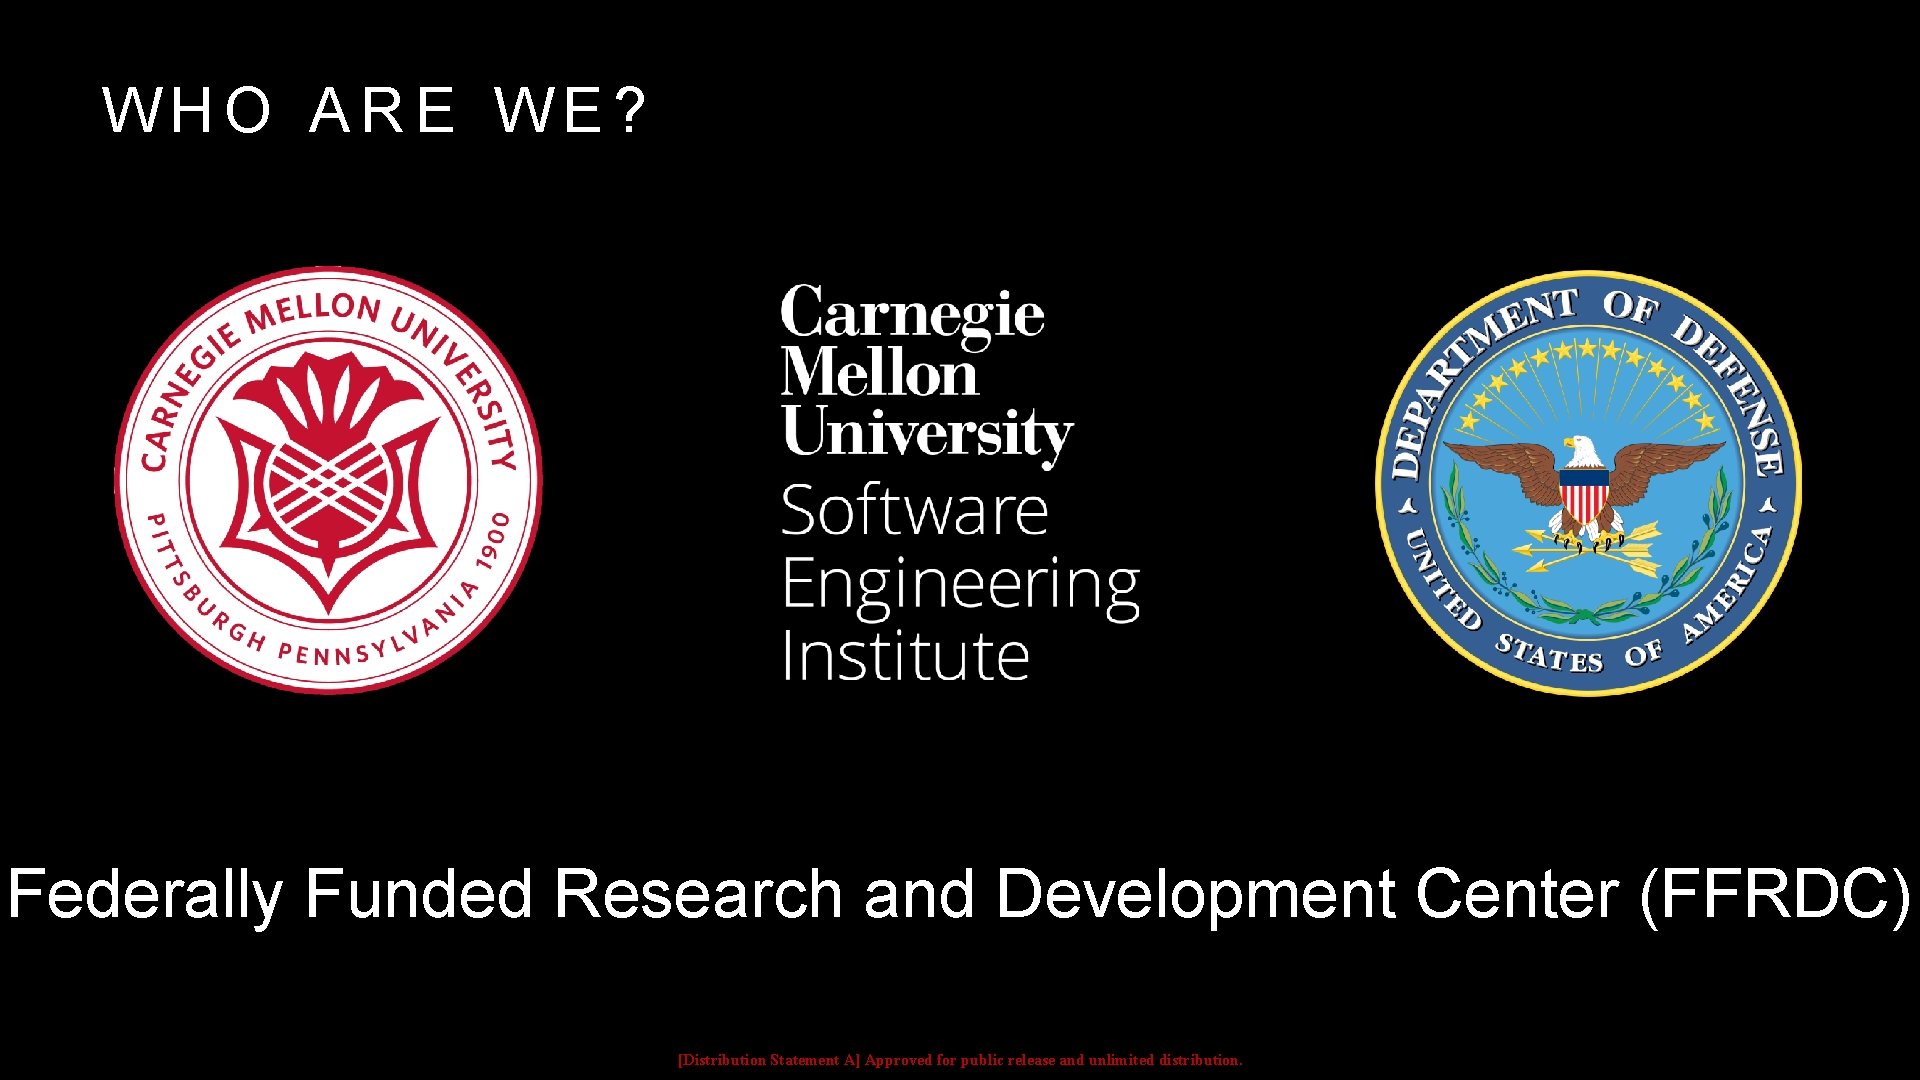 WHO ARE WE? Federally Funded Research and Development Center (FFRDC) [Distribution Statement A] Approved